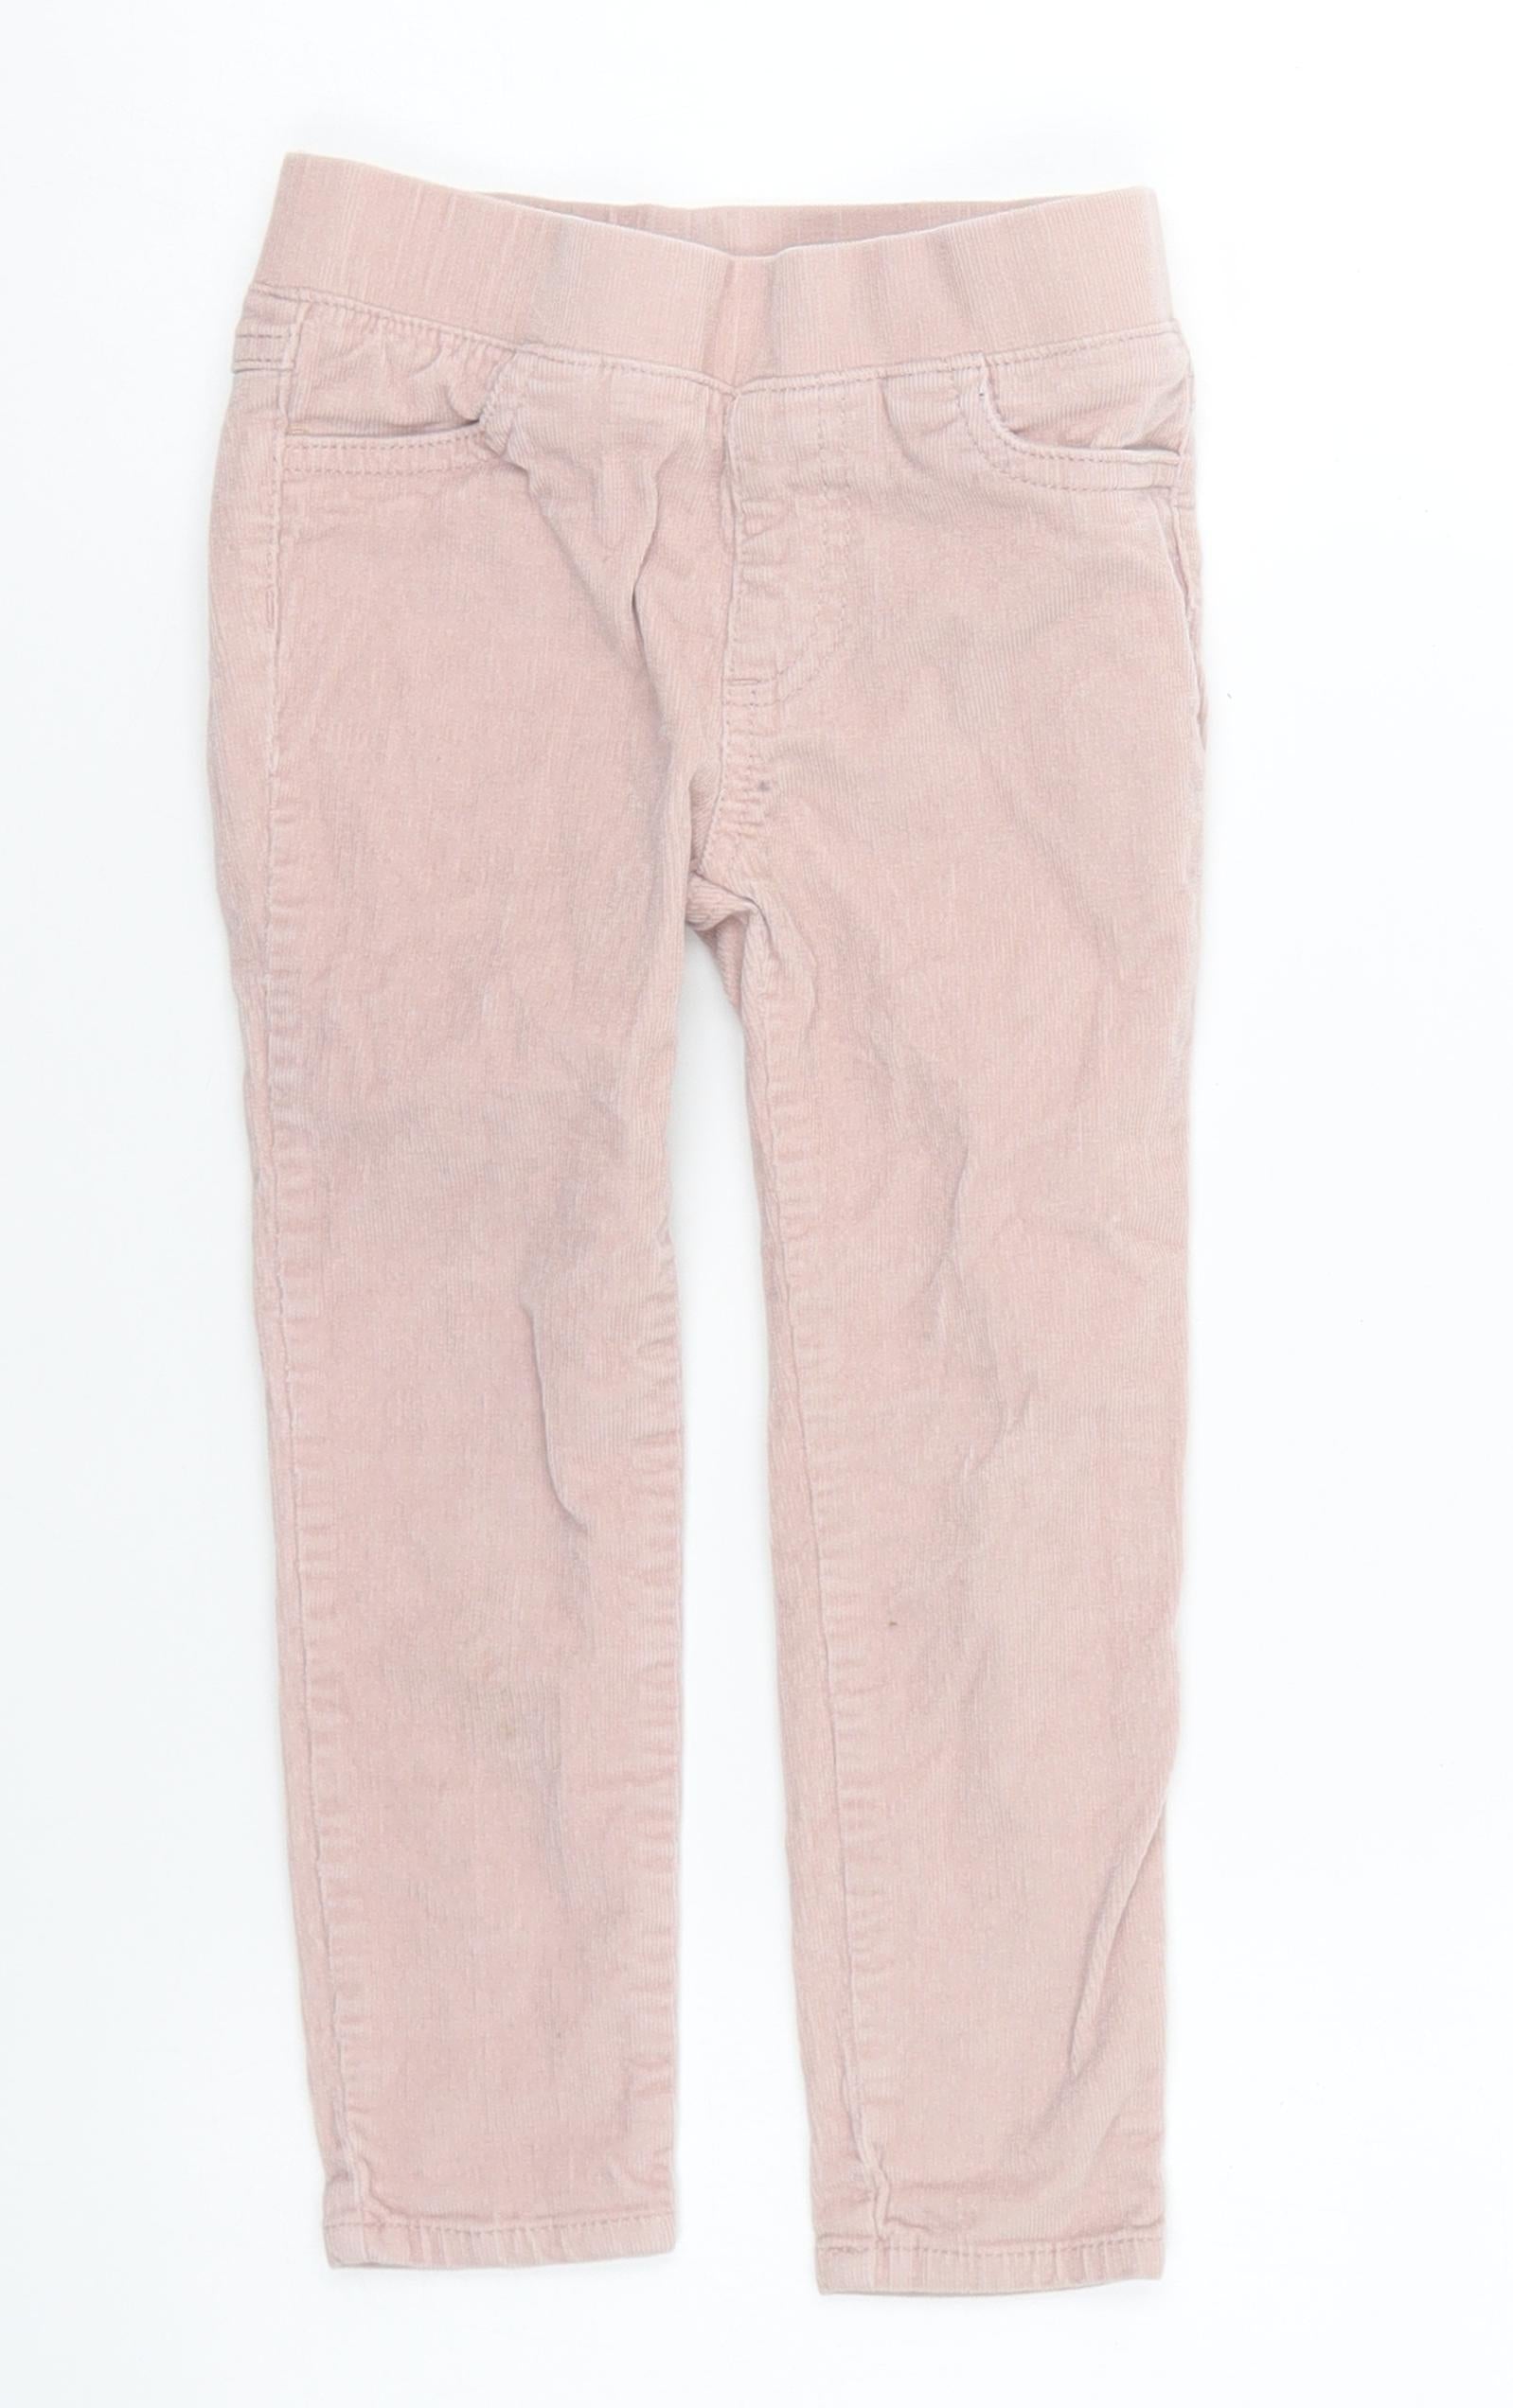 F&F Clothing Women's Pants On Sale Up To 90% Off Retail